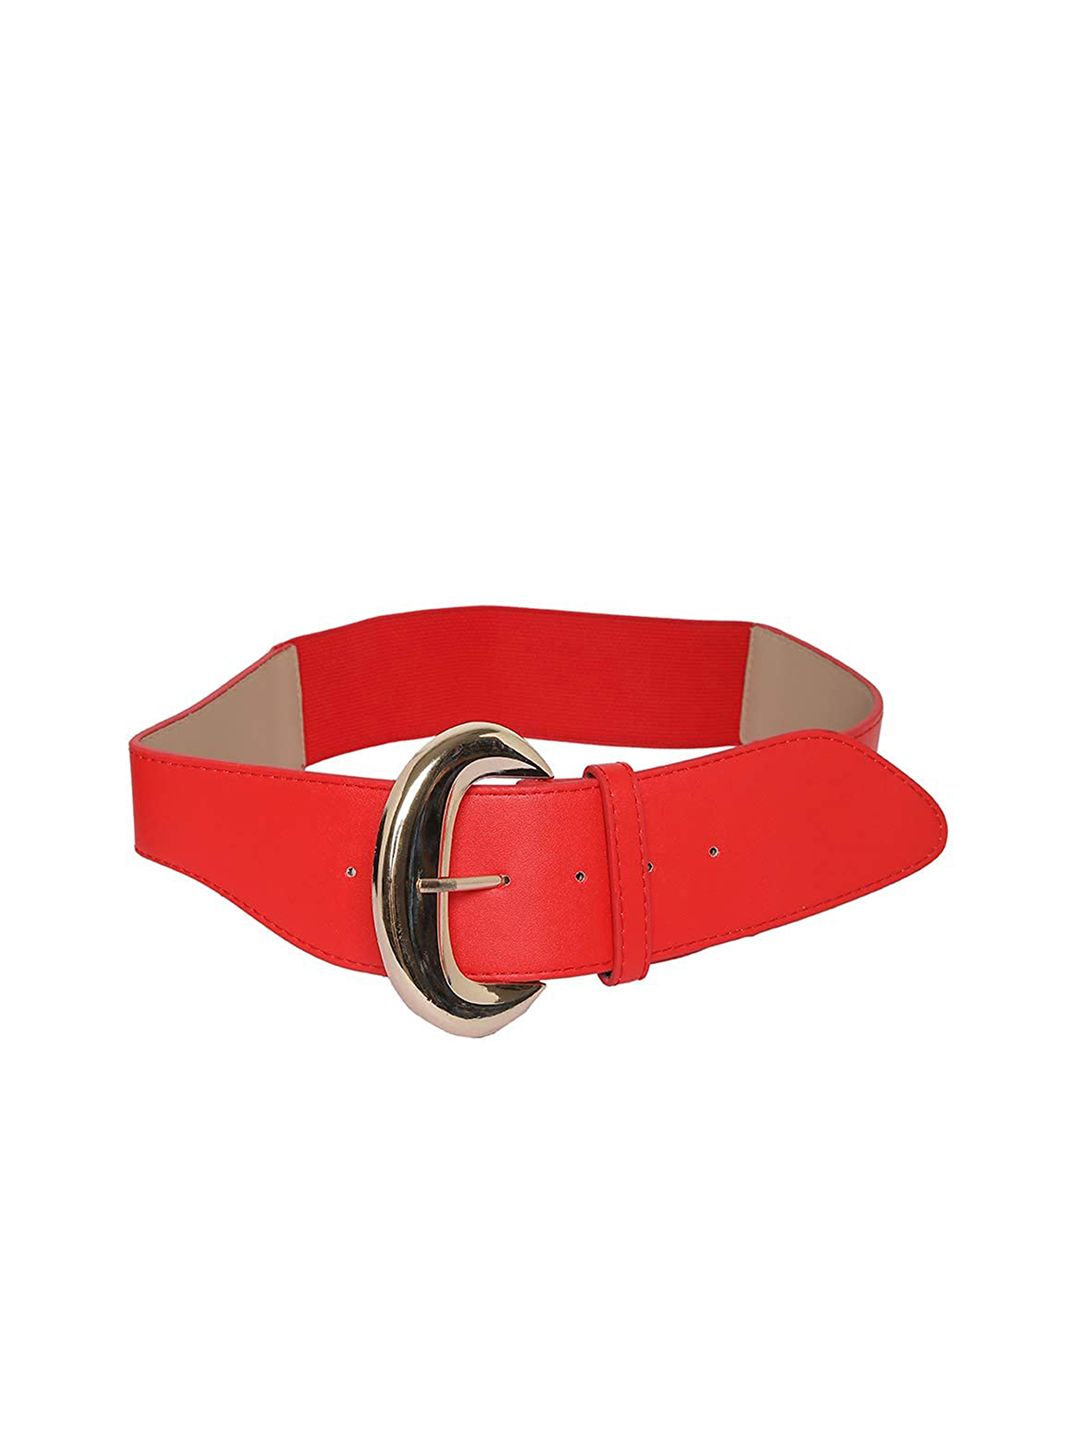 Mali Fionna Women Red Solid Belt Price in India